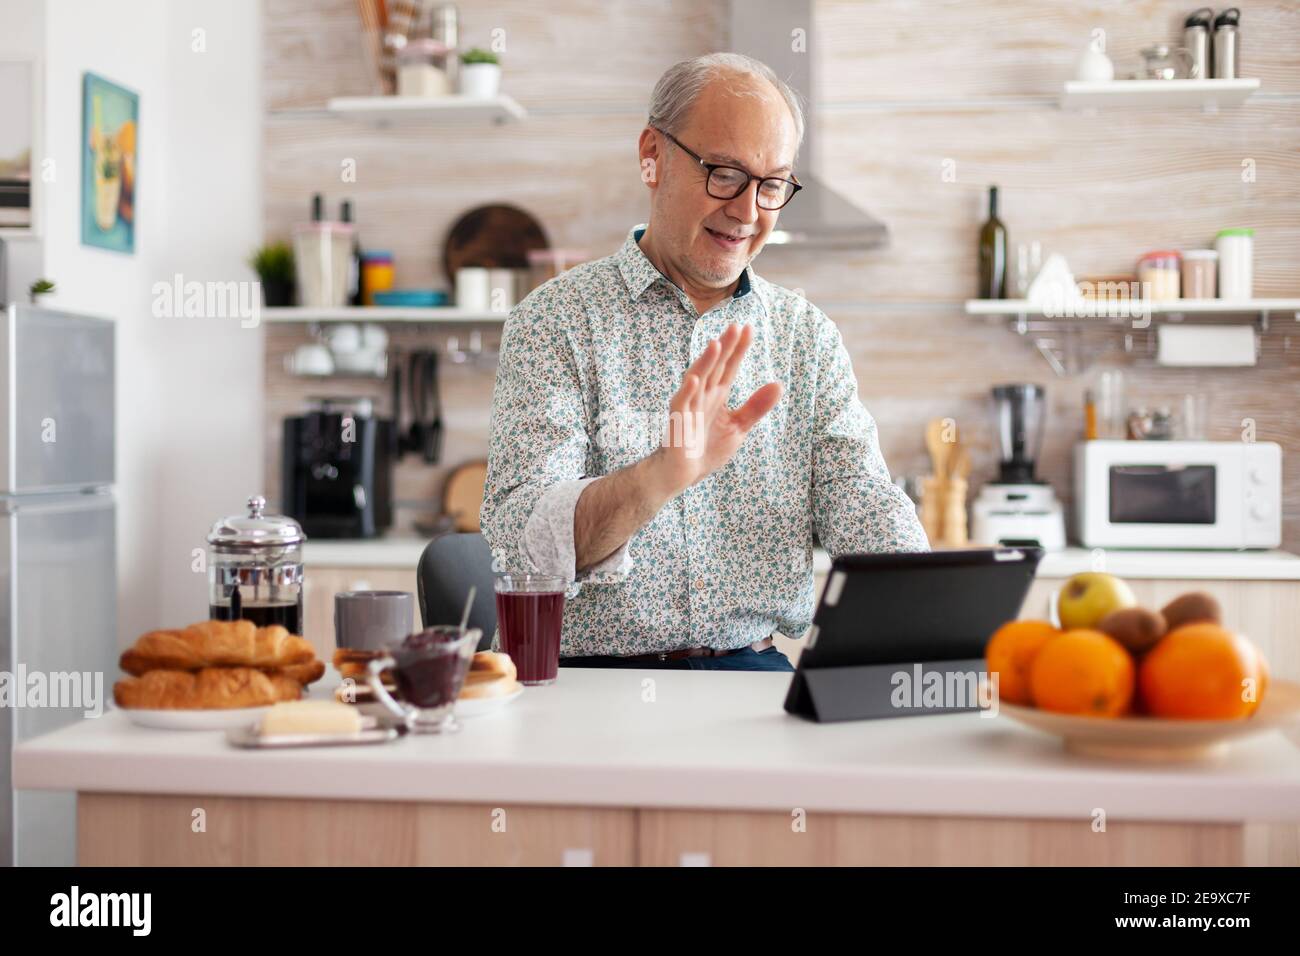 Mature man waving while having a conversation during video call in kitchen enjoying breakfast. Elderly person using internet online chat technology, tablet webcam for virtual conference call Stock Photo